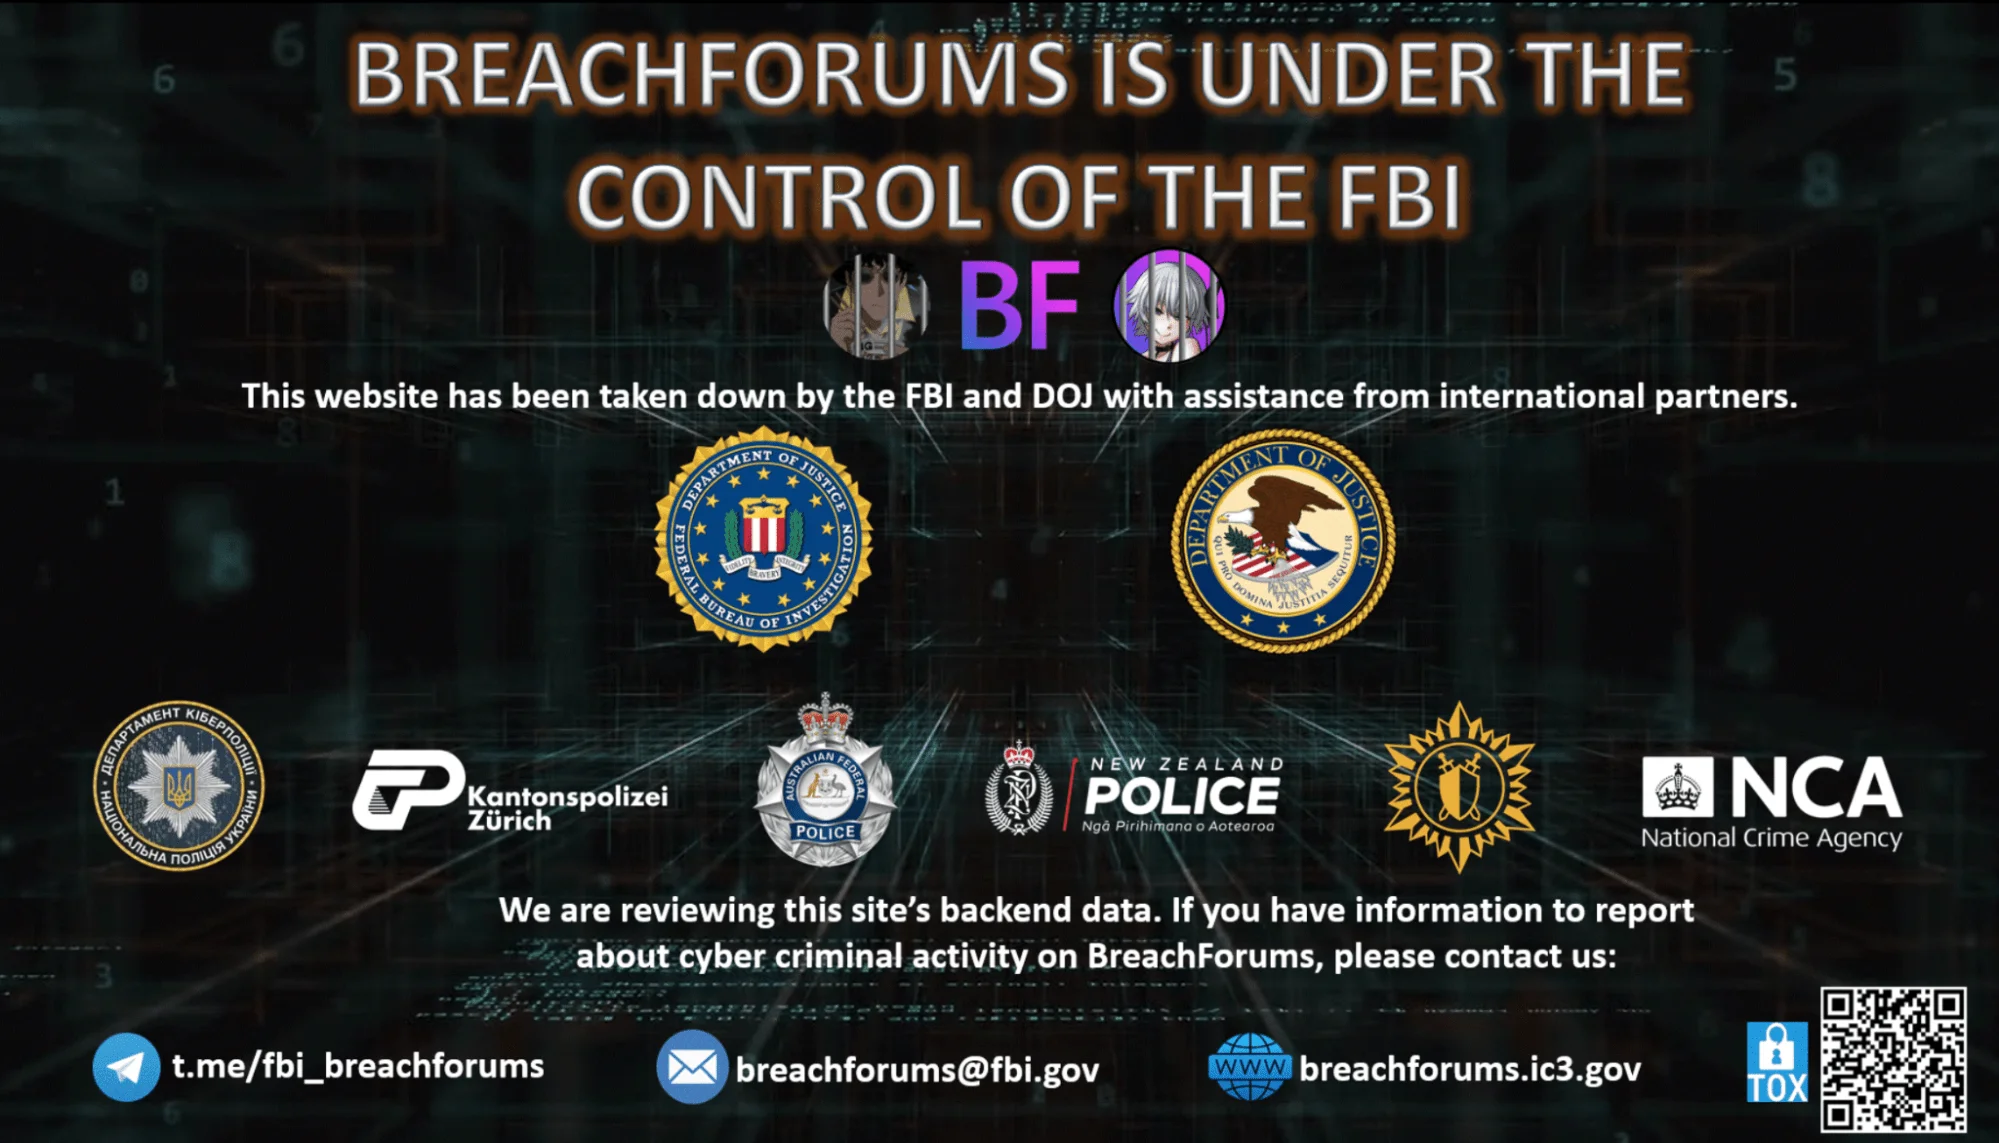 Banner displayed by the FBI at the entrance of the Breach forum